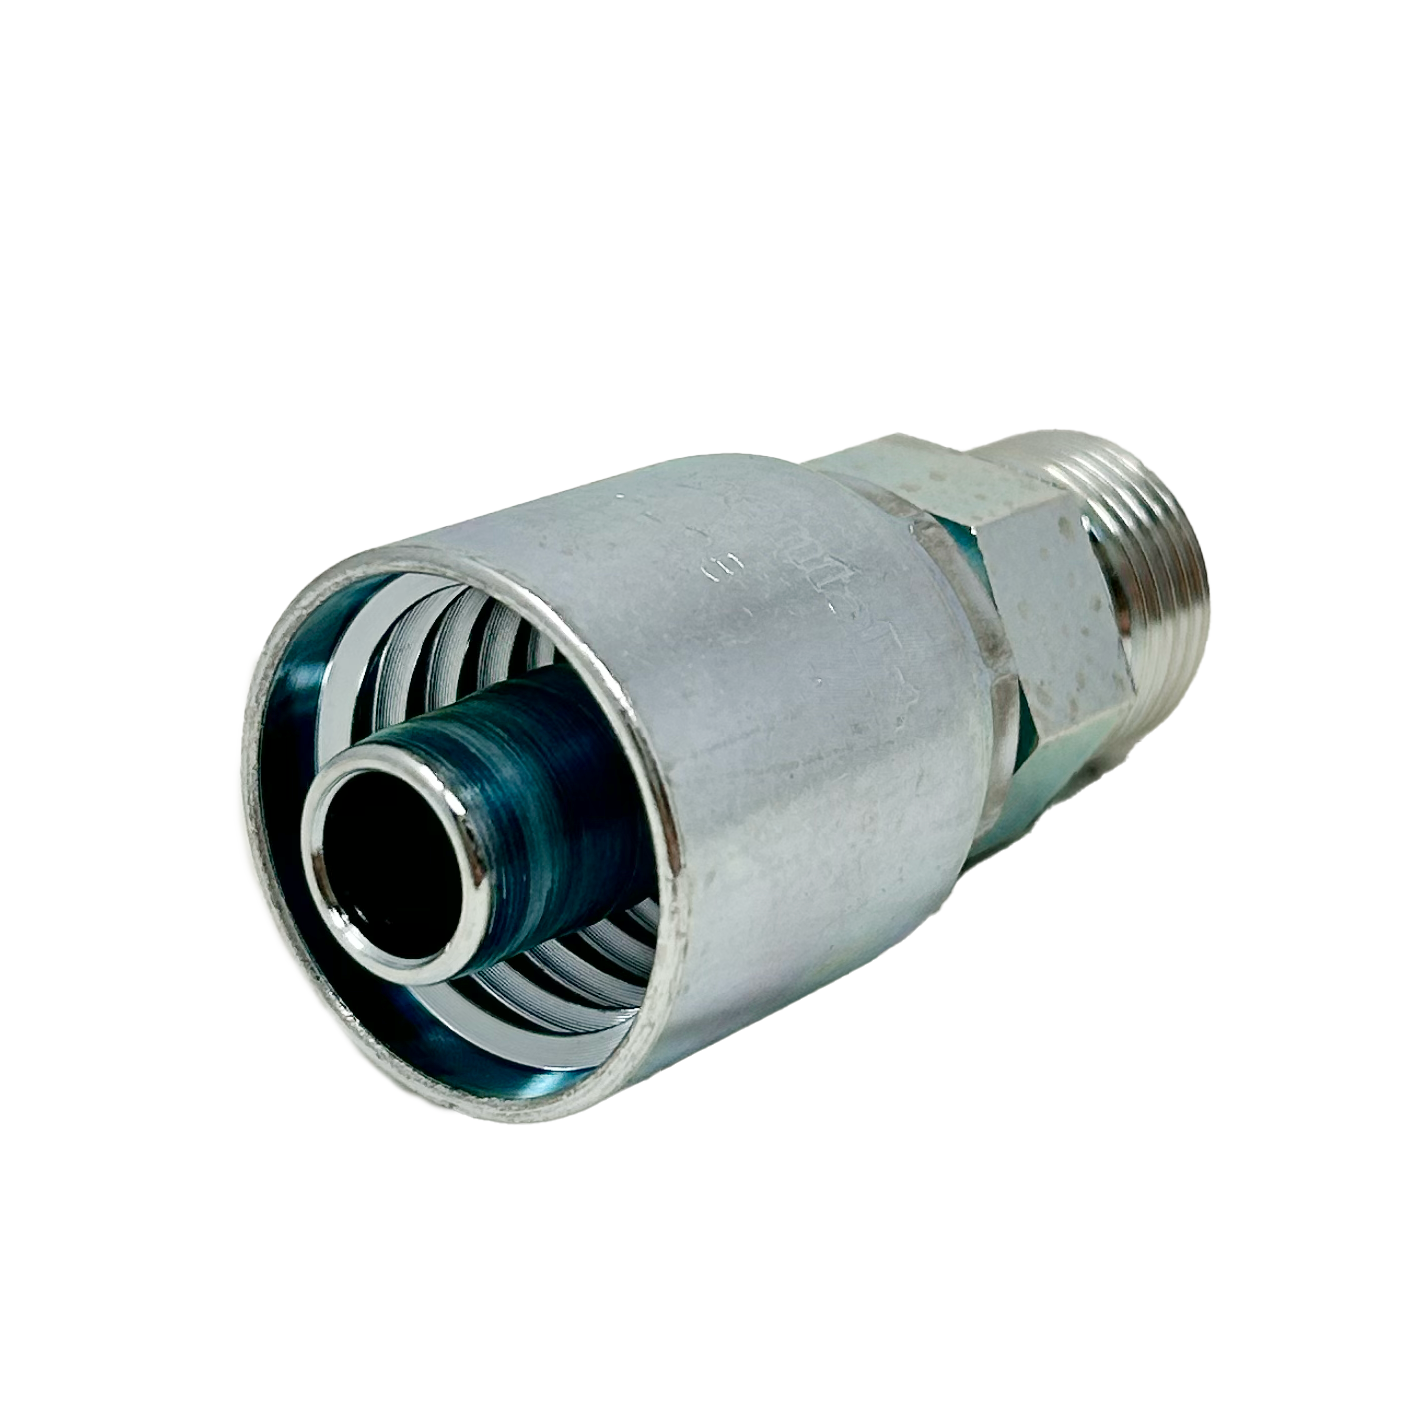 B2-OFM-0812: Continental Hose Fitting, 0.5 (1/2") Hose ID x 1-3/16-12 Male ORFS, Straight Rigid Connection